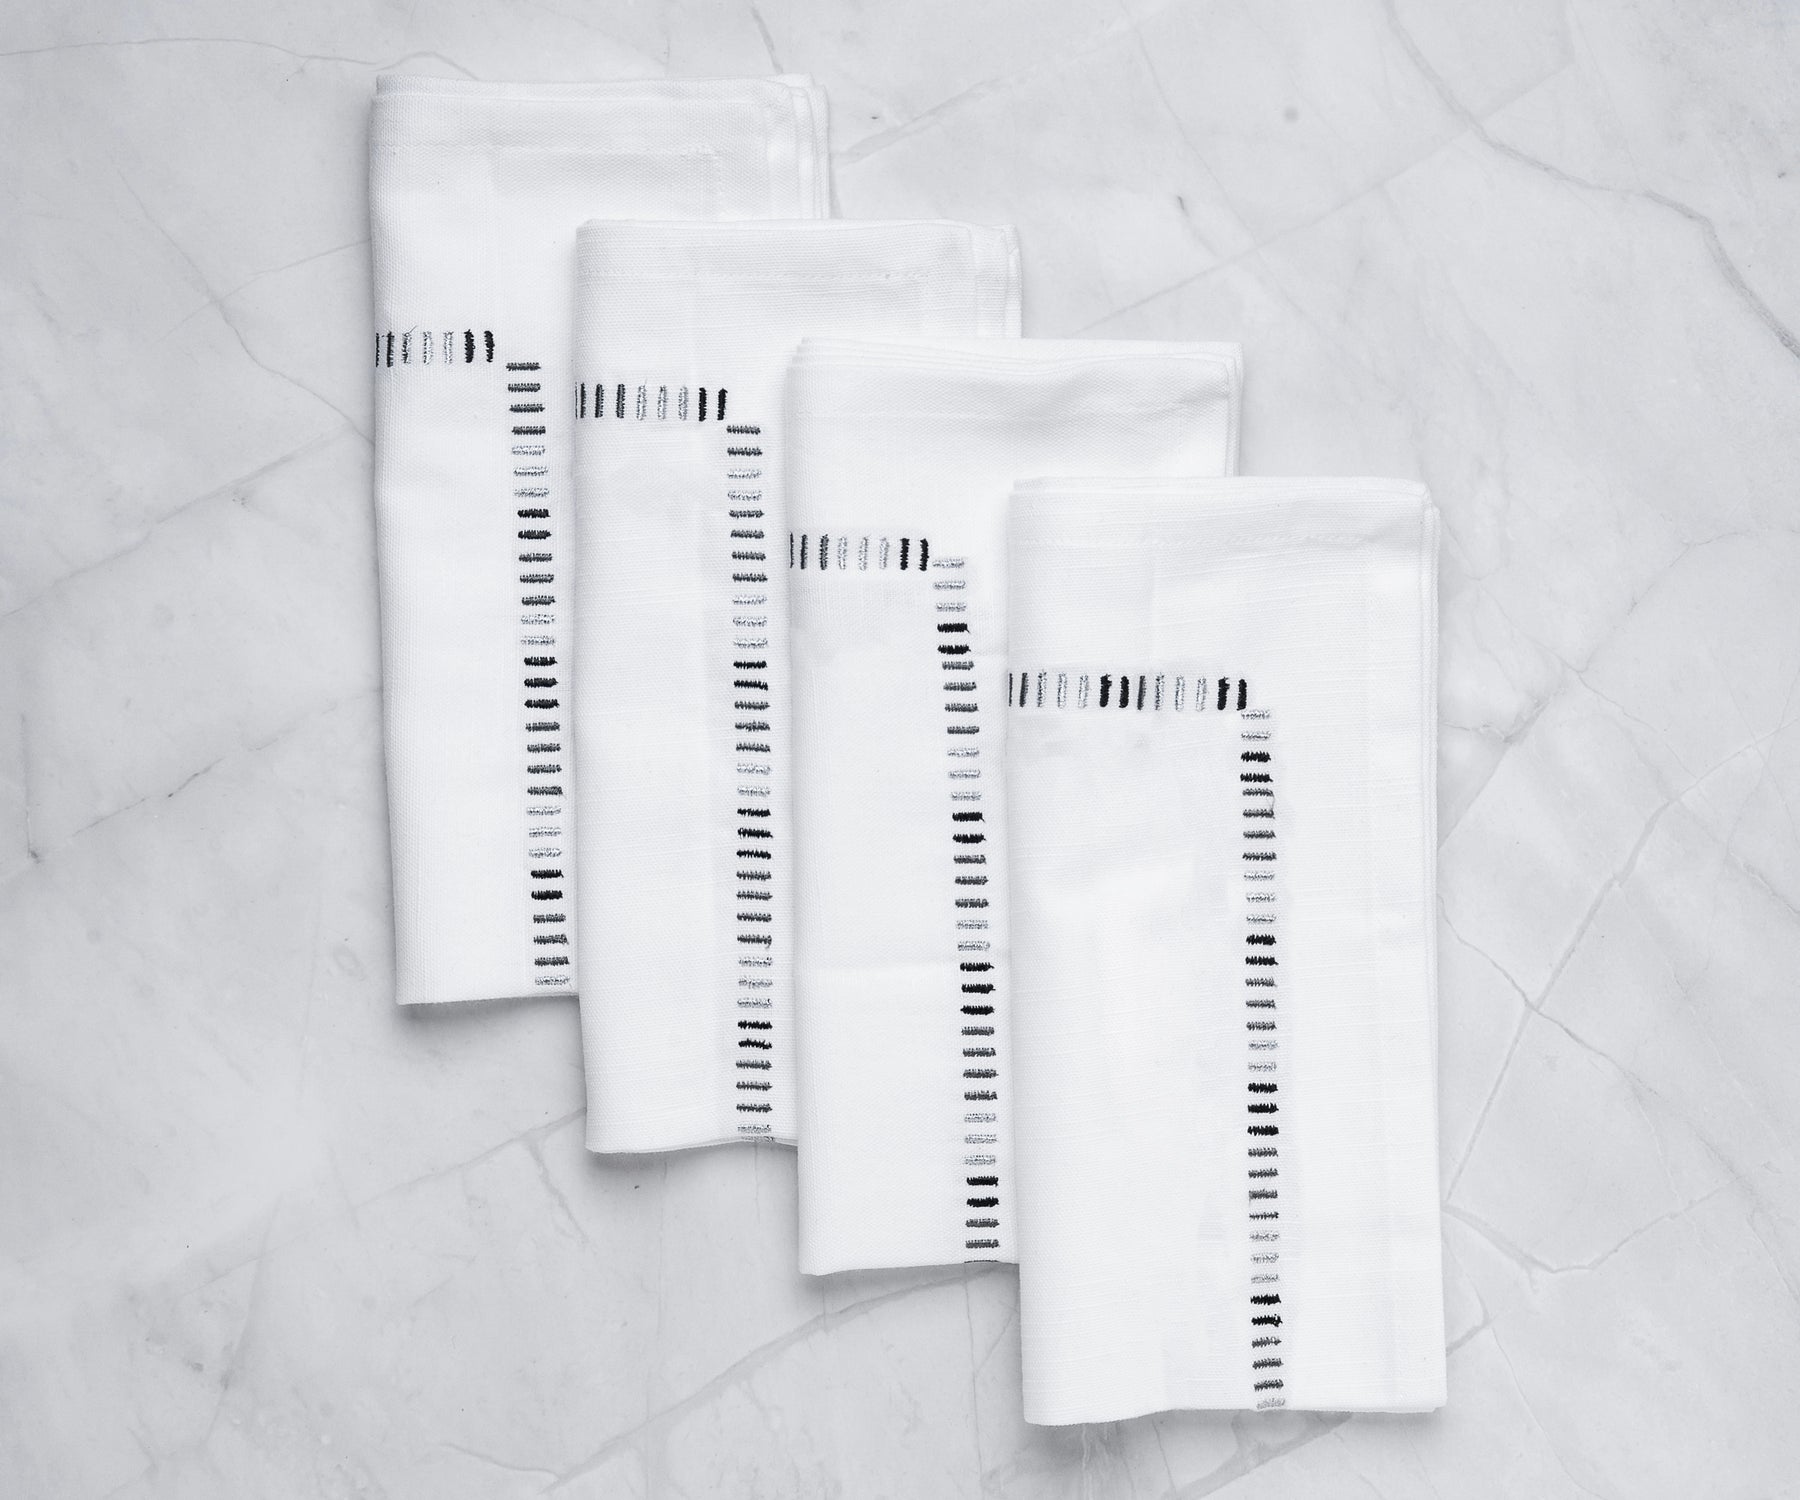  Harmonie napkins for a coordinated table setting